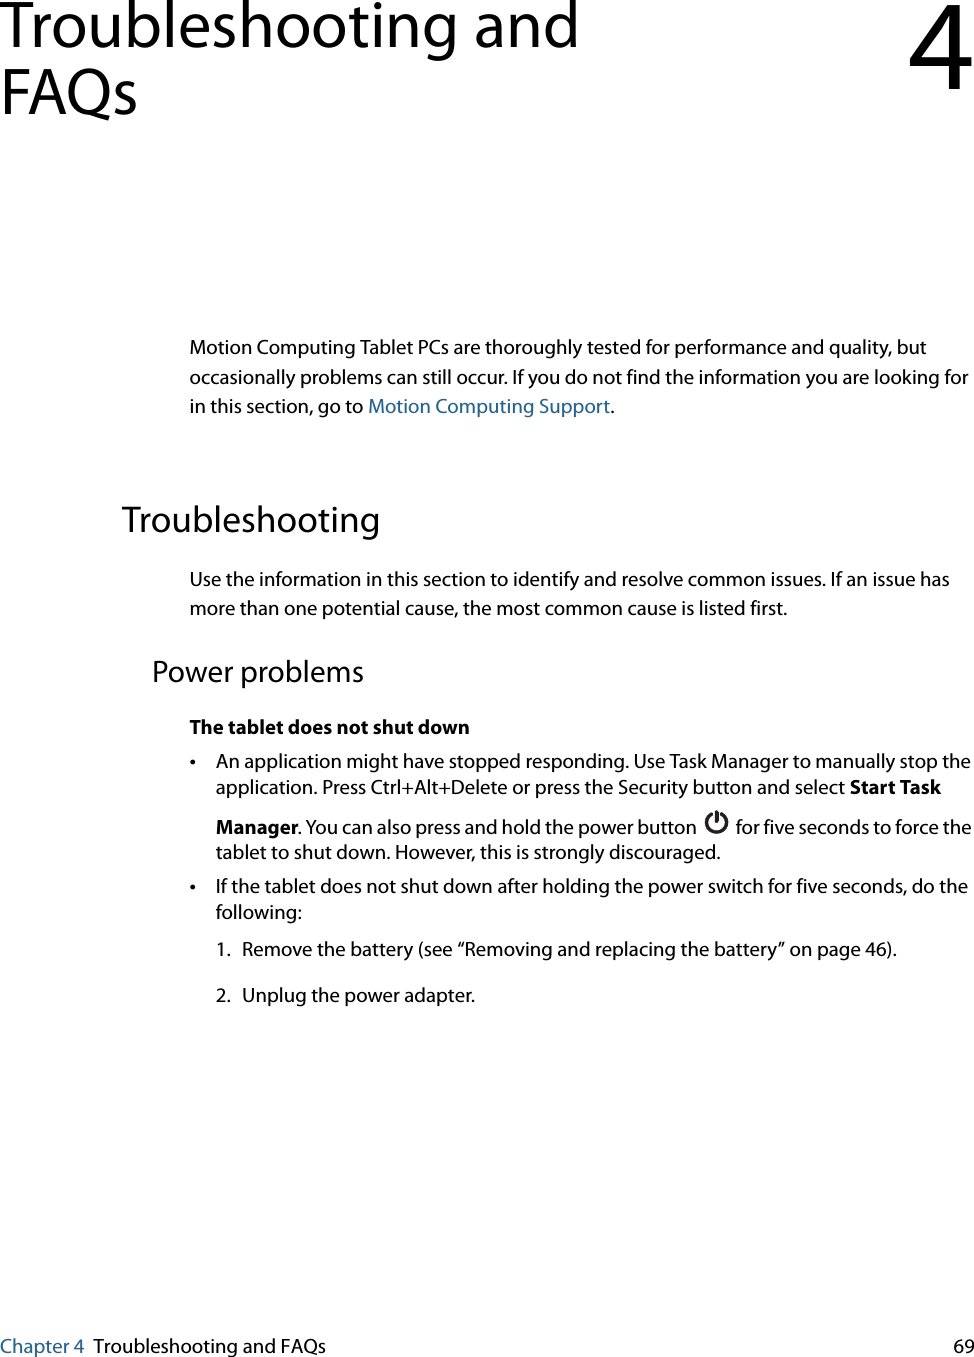 Chapter 4 Troubleshooting and FAQs 69Troubleshooting and FAQs 4Motion Computing Tablet PCs are thoroughly tested for performance and quality, but occasionally problems can still occur. If you do not find the information you are looking for in this section, go to Motion Computing Support.TroubleshootingUse the information in this section to identify and resolve common issues. If an issue has more than one potential cause, the most common cause is listed first.Power problemsThe tablet does not shut down•An application might have stopped responding. Use Task Manager to manually stop the application. Press Ctrl+Alt+Delete or press the Security button and select Start Task Manager. You can also press and hold the power button   for five seconds to force the tablet to shut down. However, this is strongly discouraged.•If the tablet does not shut down after holding the power switch for five seconds, do the following:1. Remove the battery (see “Removing and replacing the battery” on page 46).2. Unplug the power adapter.